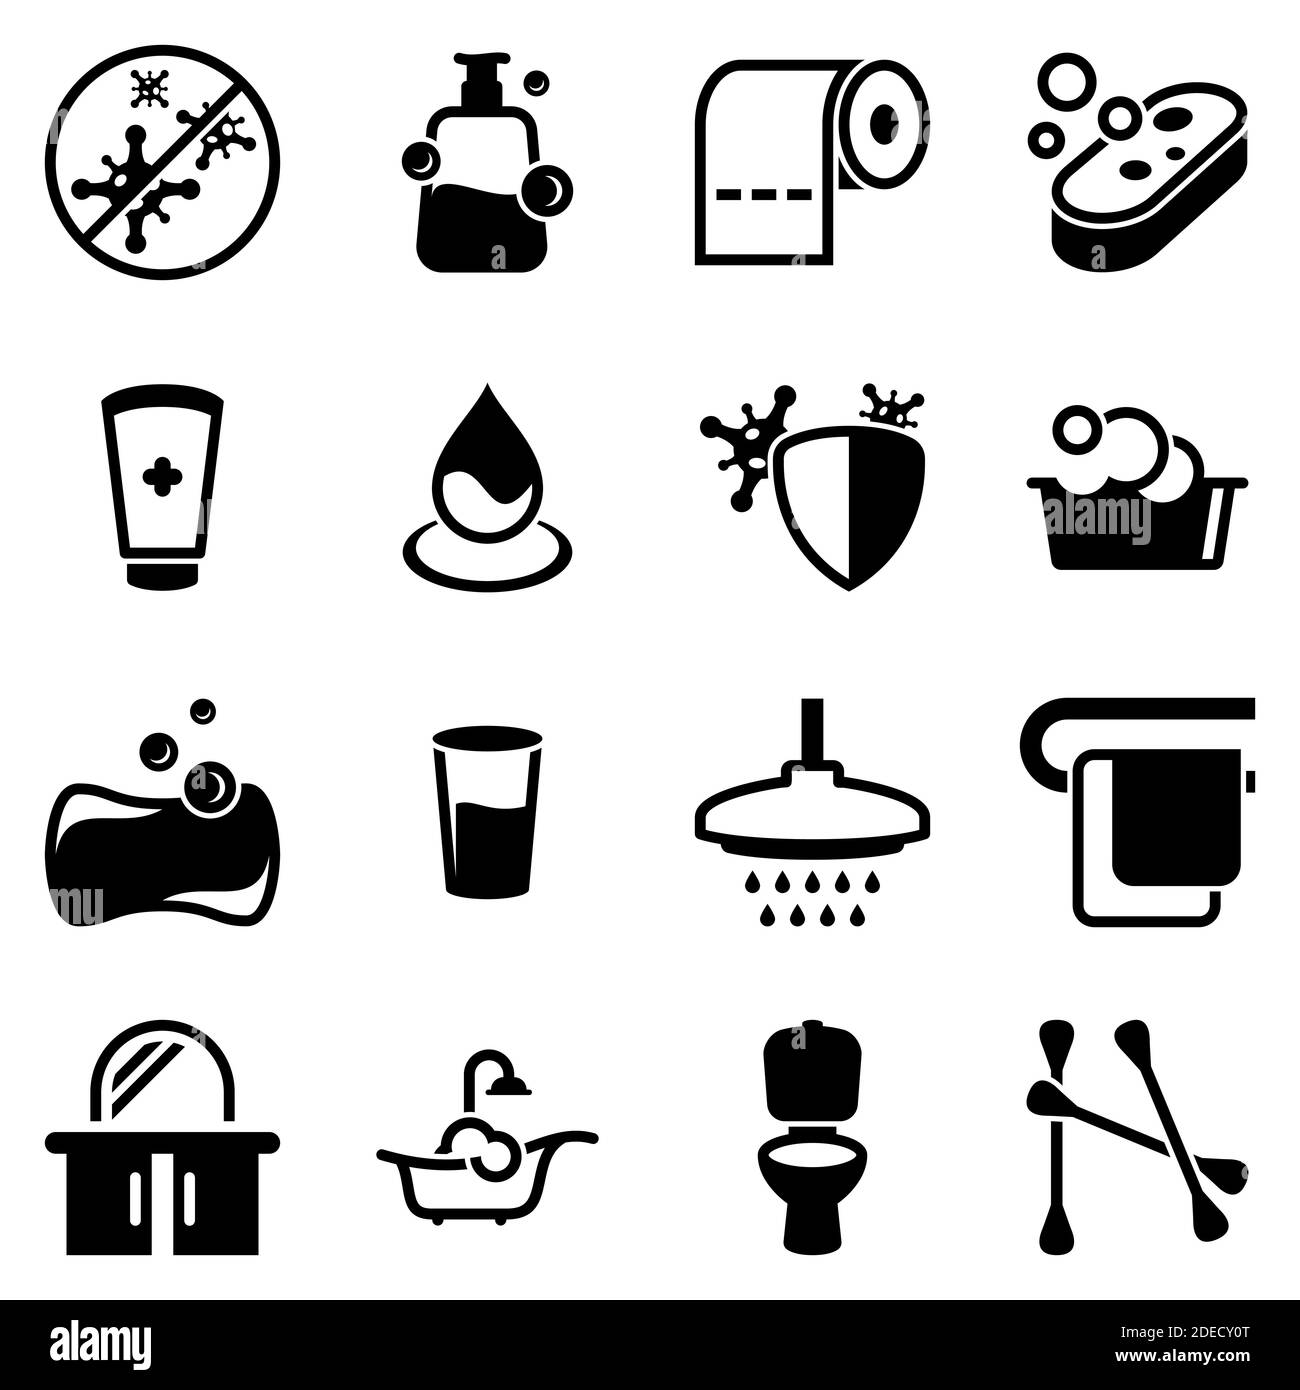 Set of simple icons on a theme Hygiene, sanitation, latrine, vector, design, collection, flat, sign, symbol,element, object, illustration. Black icons Stock Vector